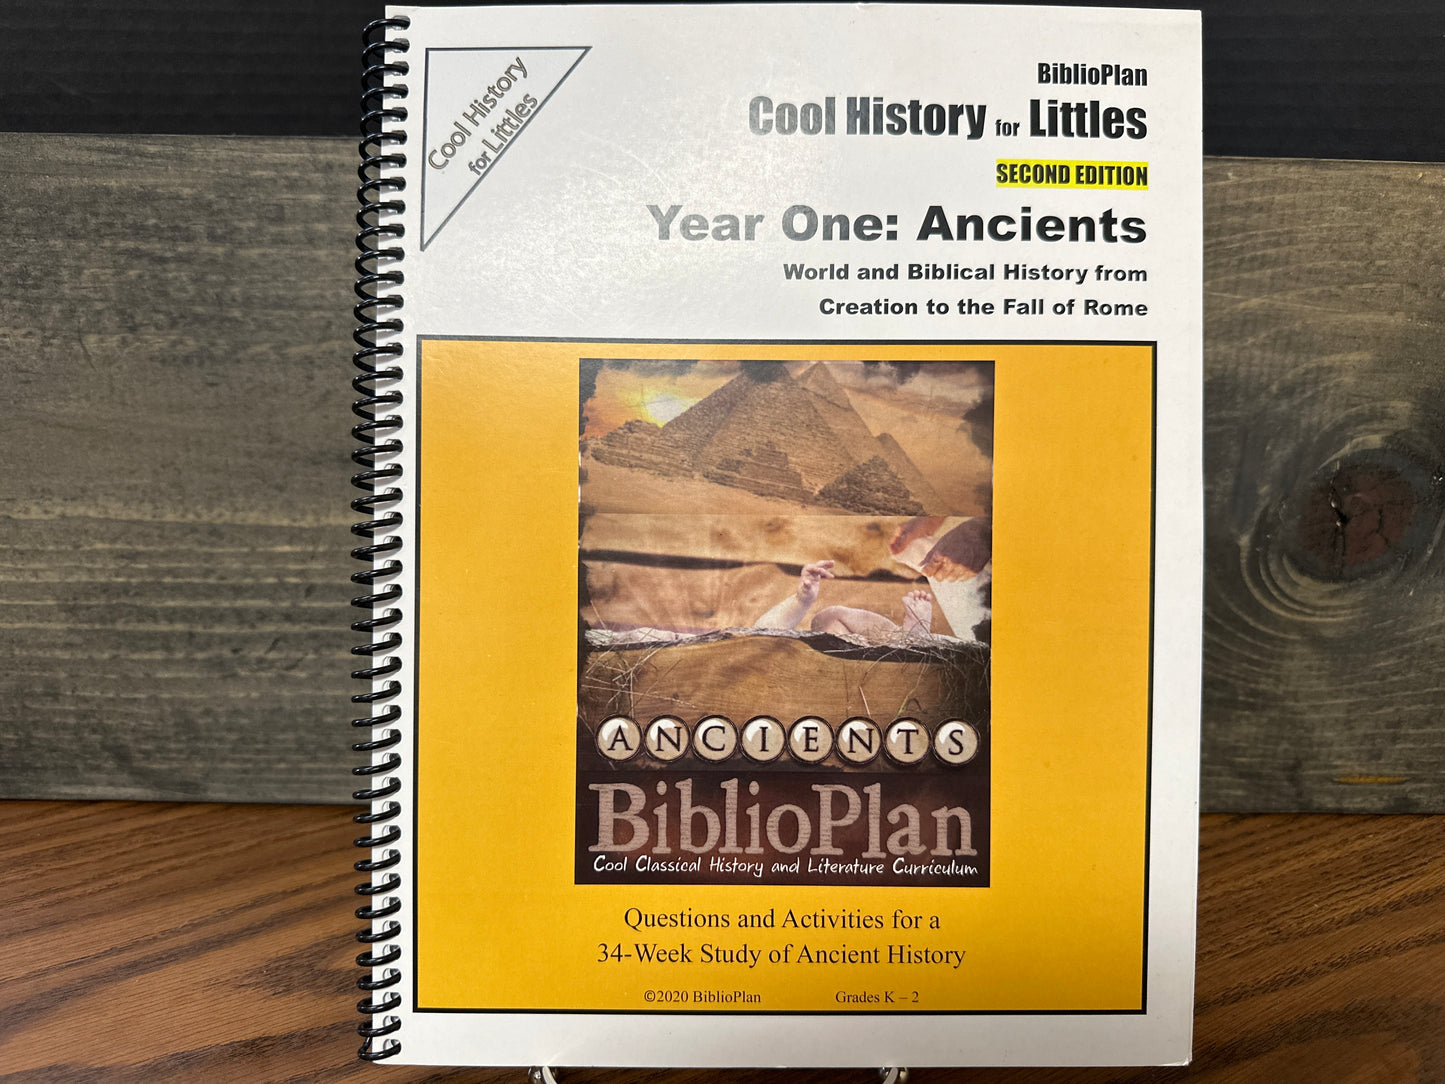 Biblioplan Cool History for Littles year one